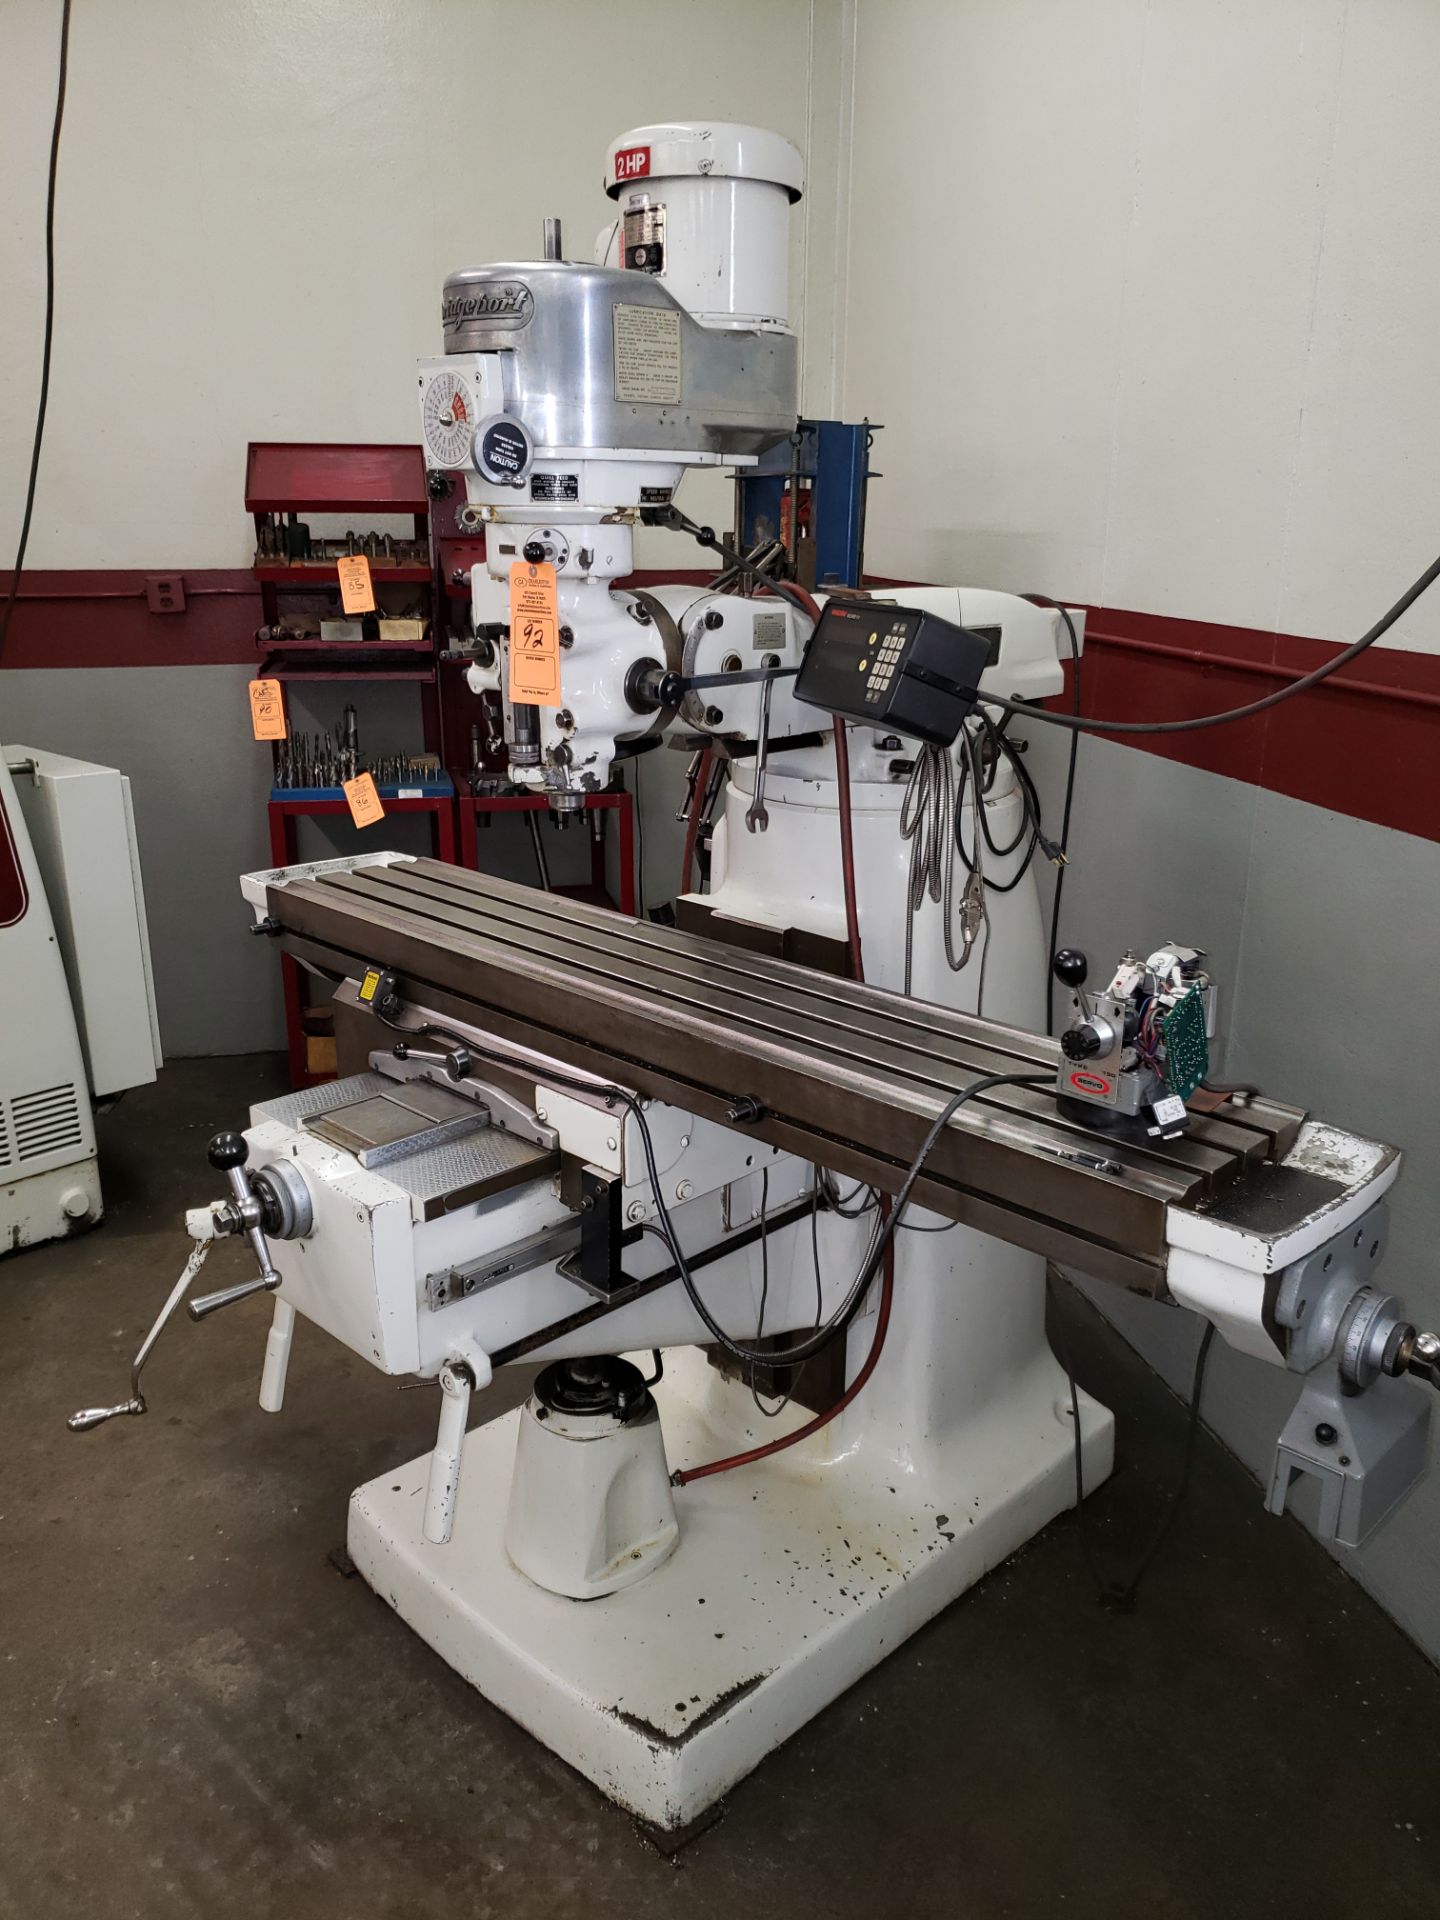 BRIDGEPORT MILLING MACHINE SERIES II SPECIAL; 2 HP 58" X 11" TABLE S#2528S W/ ANILAM WIZARD 111 DRO - Image 2 of 4